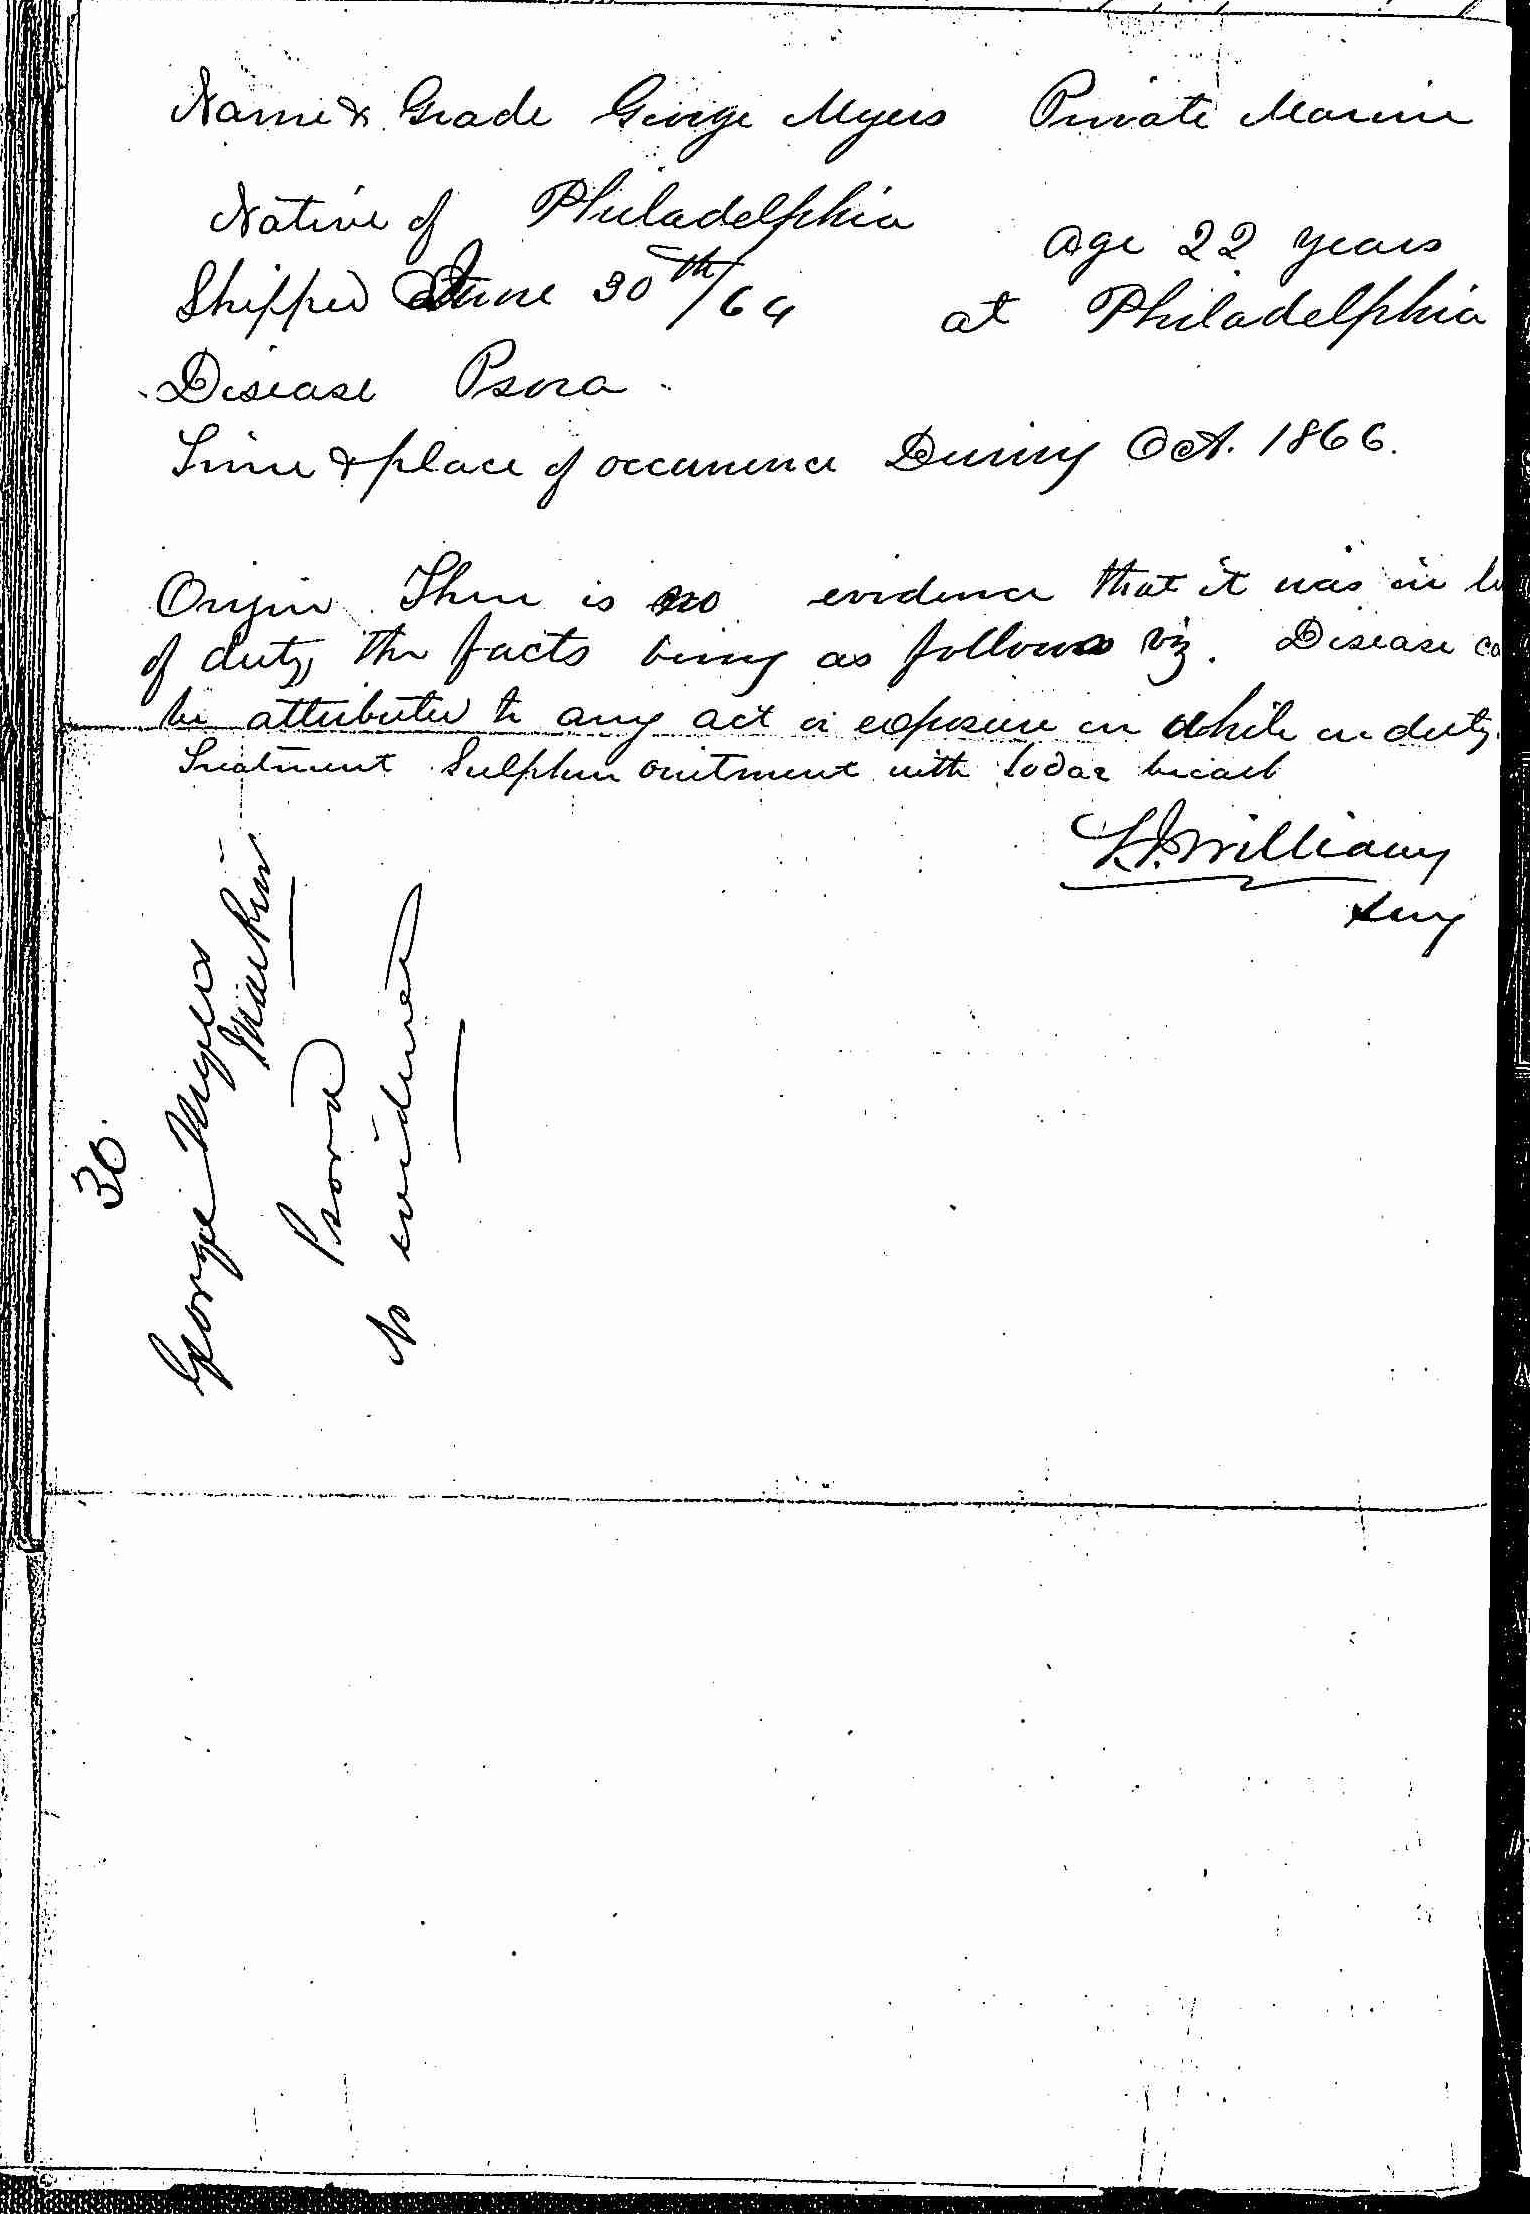 Entry for George Myers (page 2 of 2) in the log Hospital Tickets and Case Papers - Naval Hospital - Washington, D.C. - 1865-68